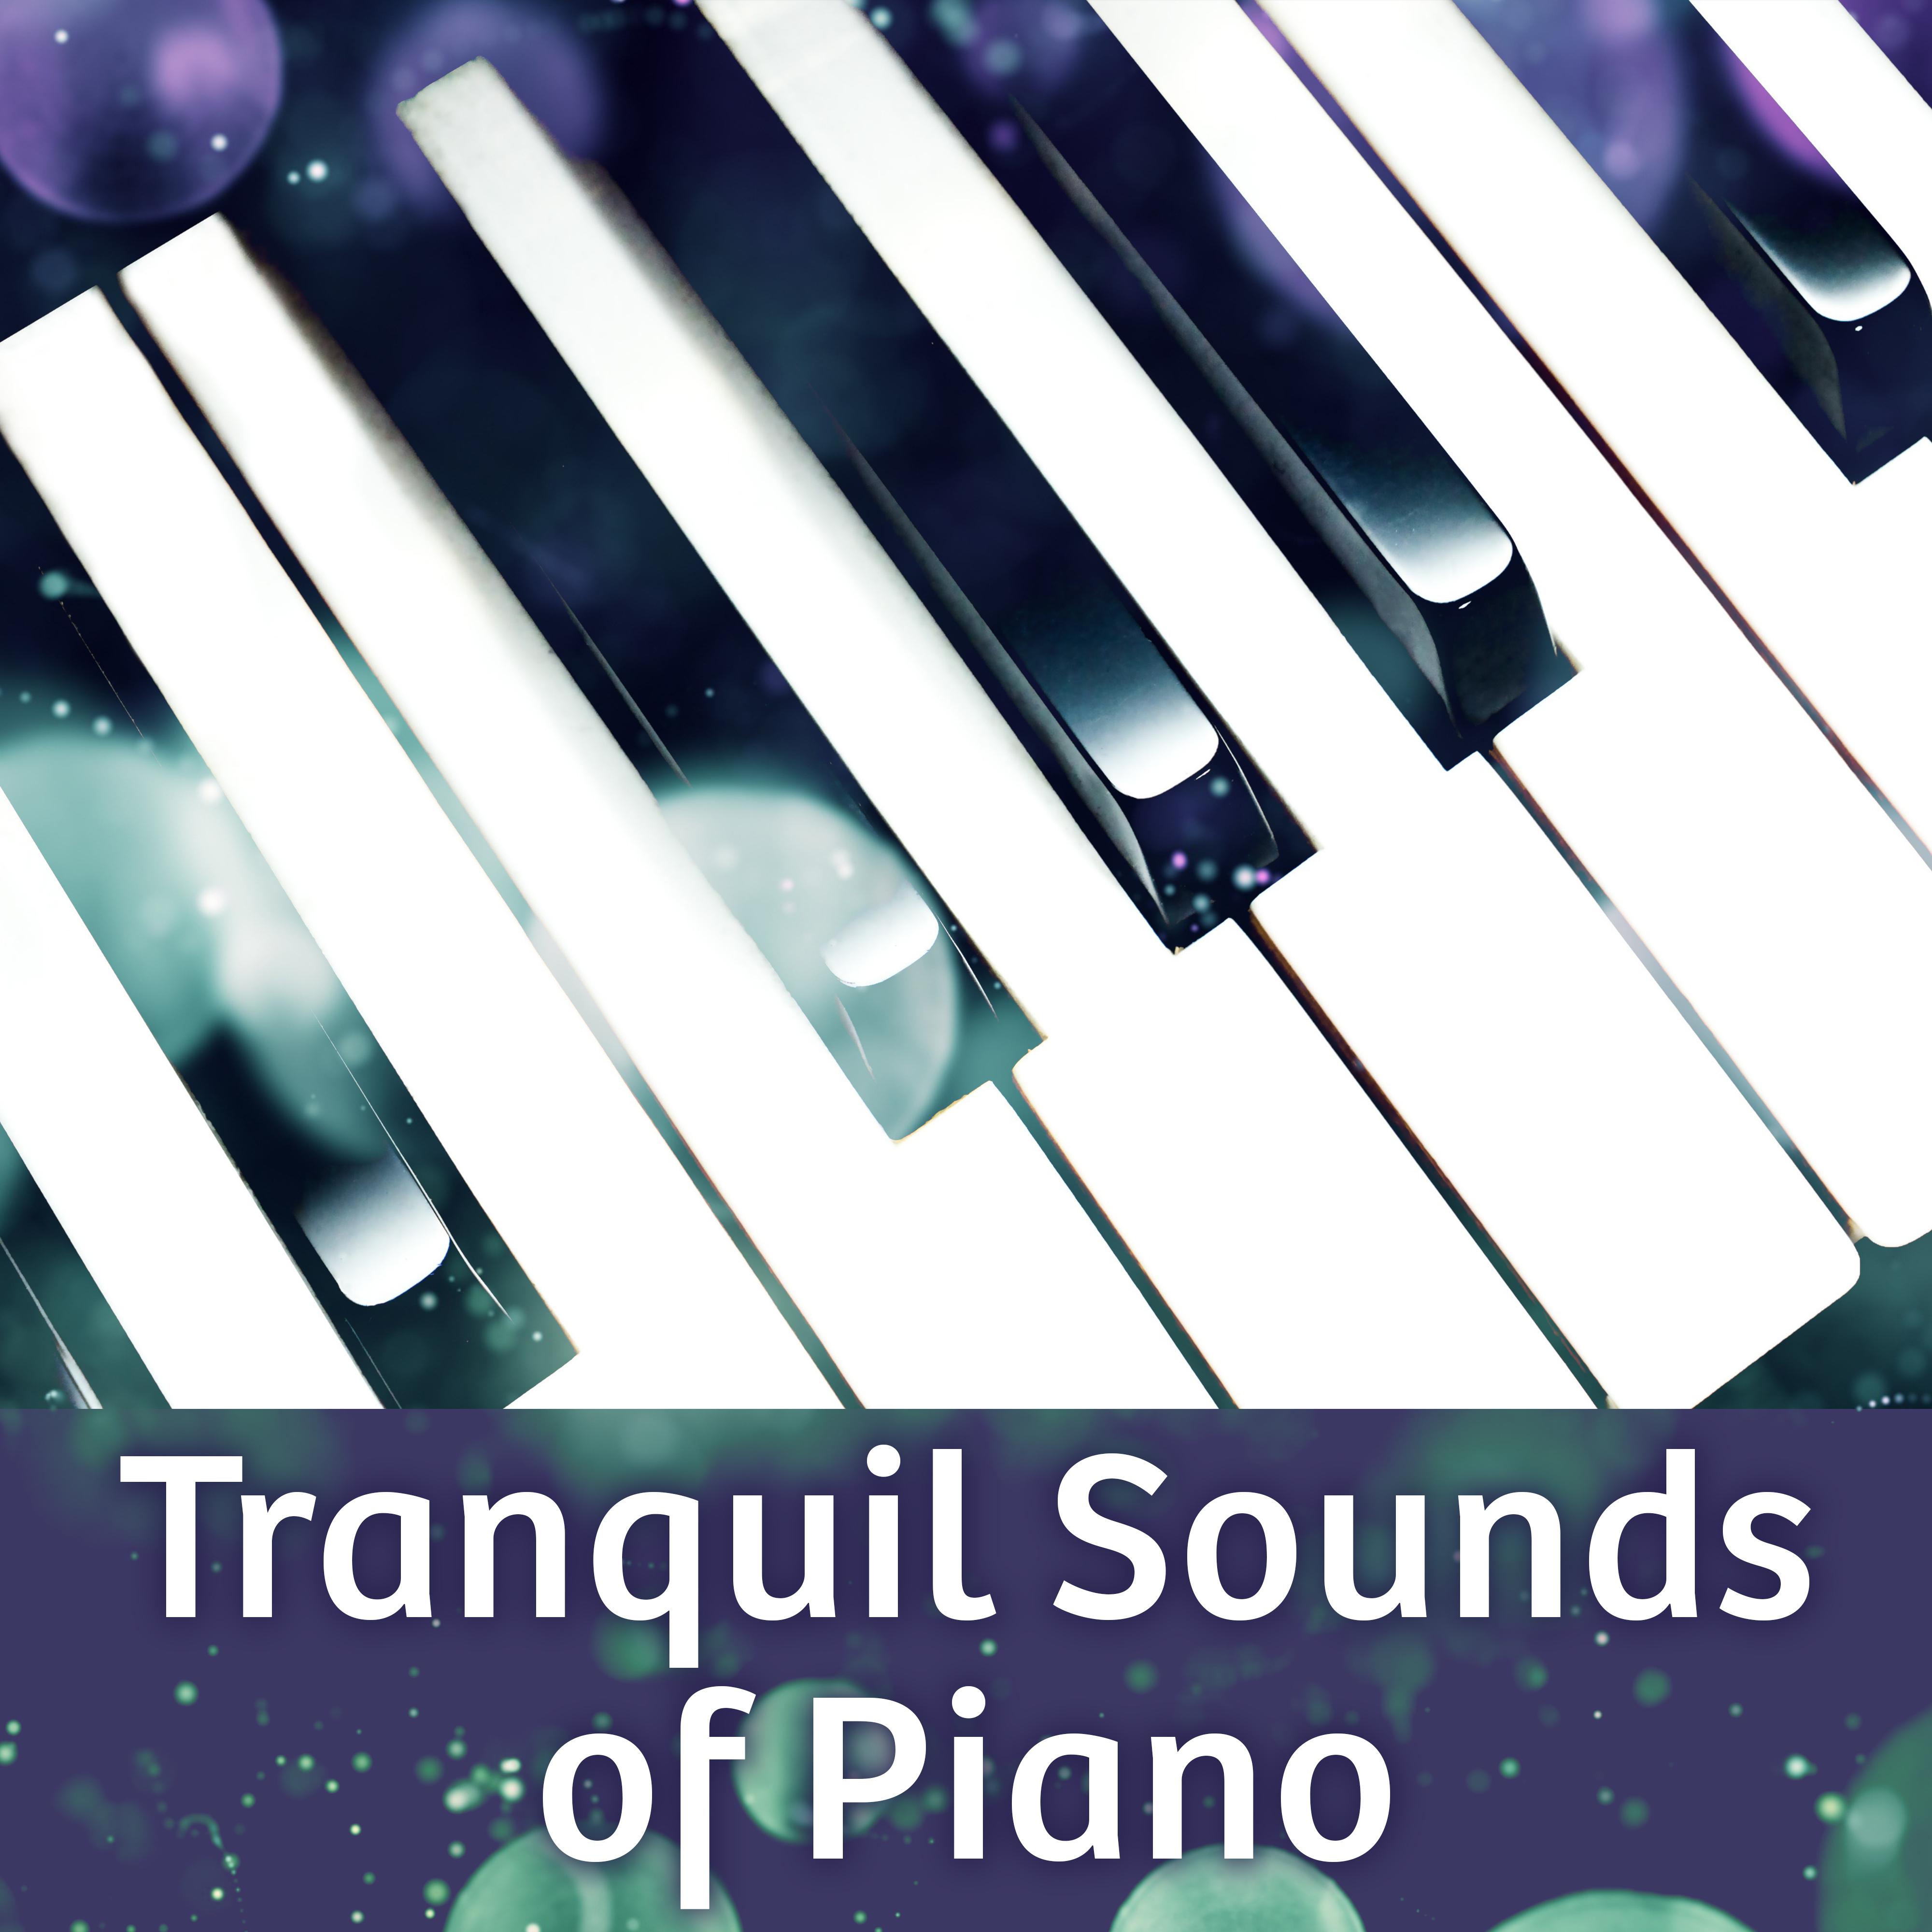 Tranquil Sounds of Piano – Relaxation Jazz Music, Deep Sleep, Soft Melodies, Instrumental Piano, Smooth Jazz, Peaceful Mind